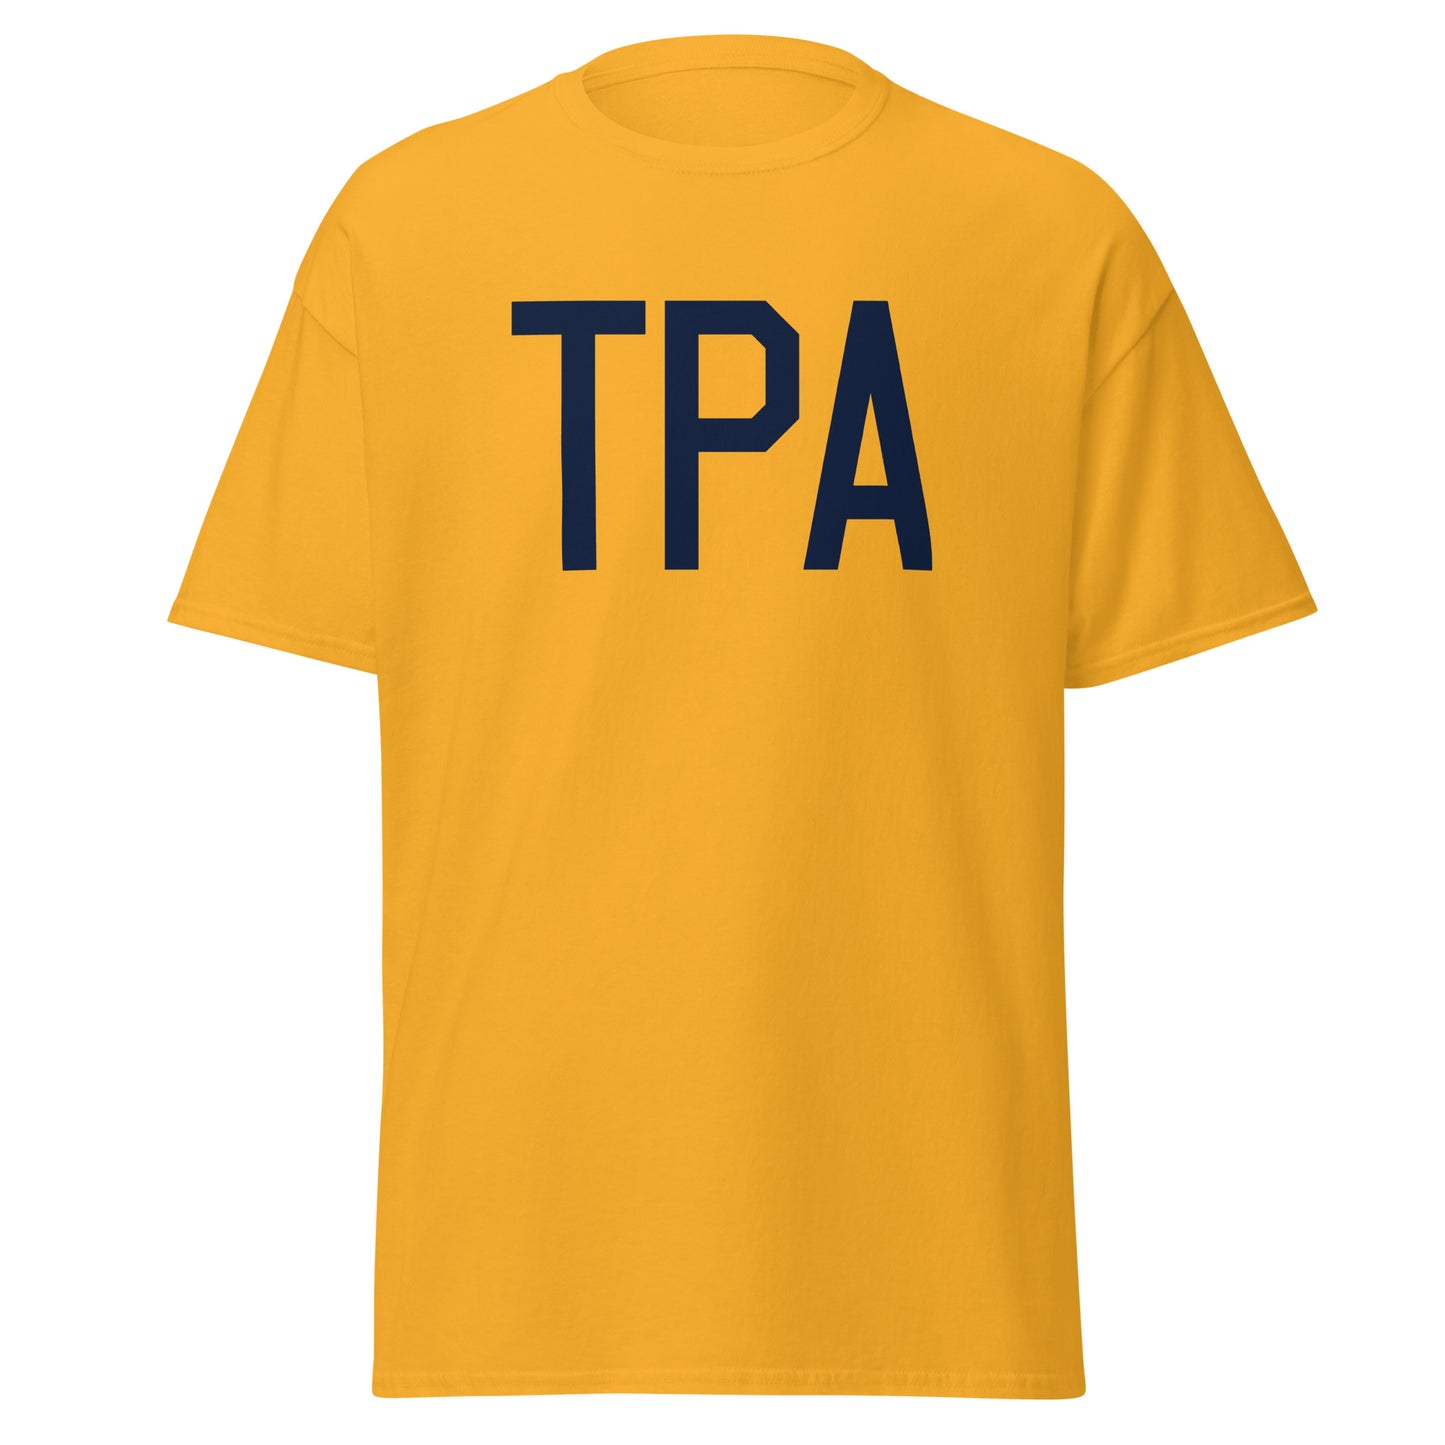 Aviation-Theme Men's T-Shirt - Navy Blue Graphic • TPA Tampa • YHM Designs - Image 05